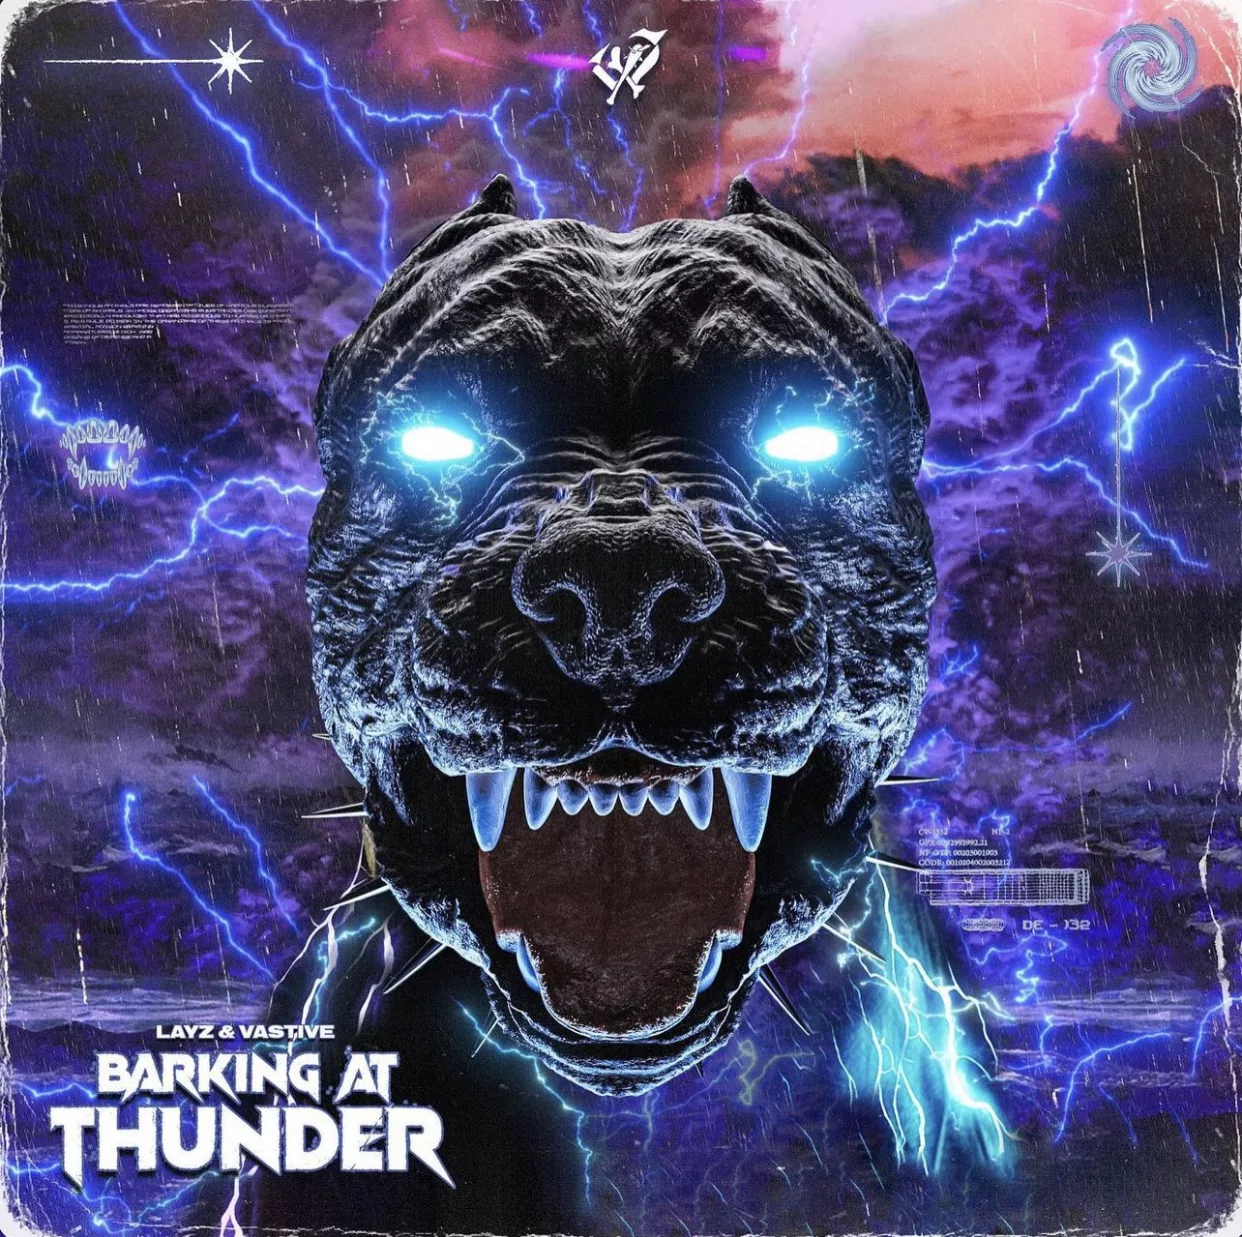 Layz and Vastive Bring the House Down With Long-Awaited Collab ‘Barking At Thunder’